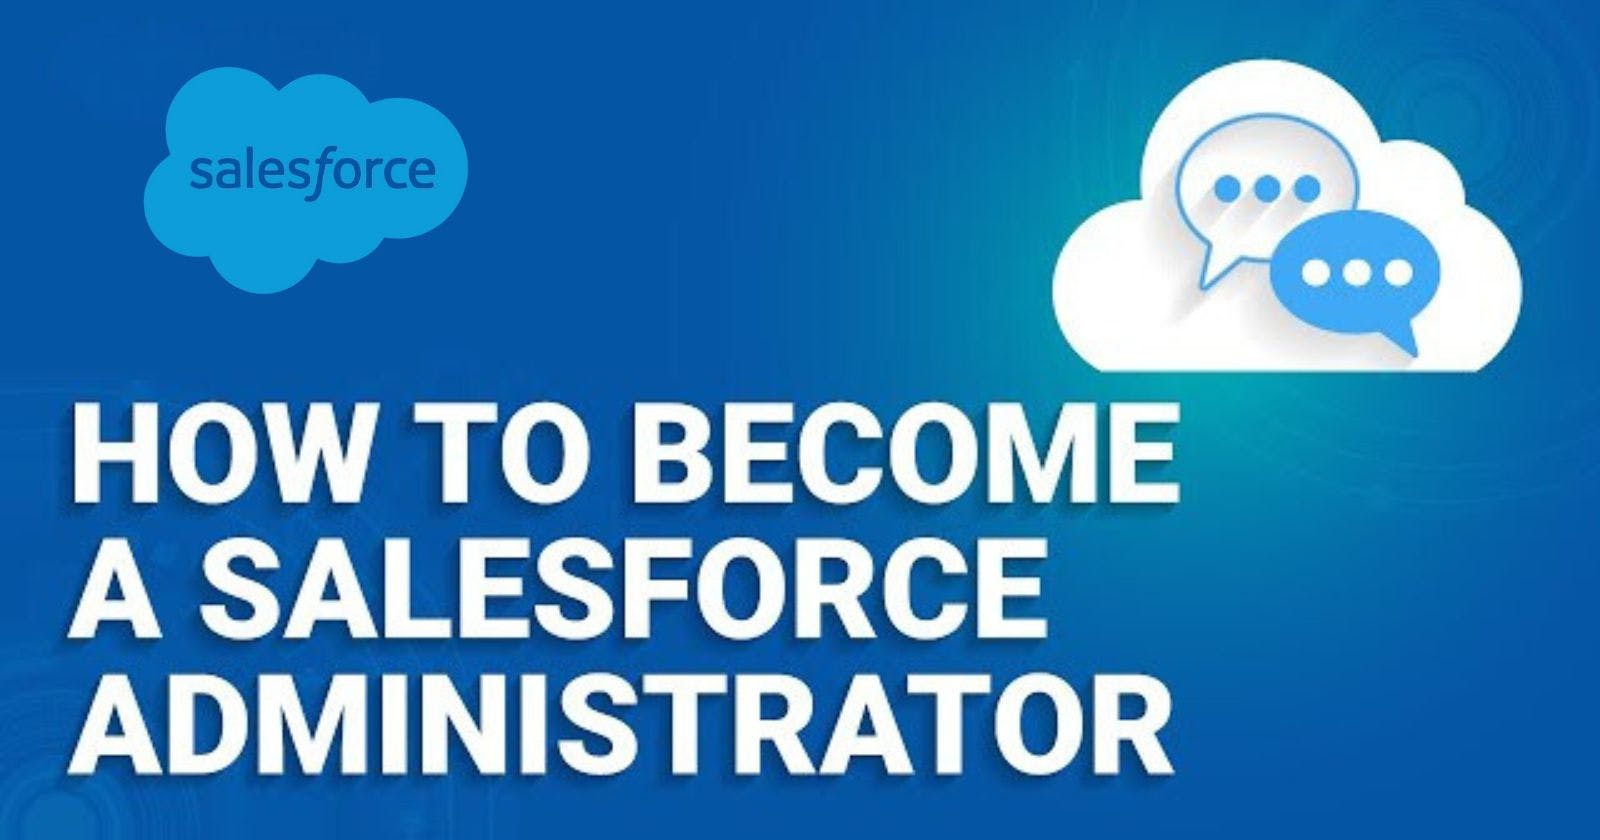 What Is a Salesforce Administrator? And How to Become One